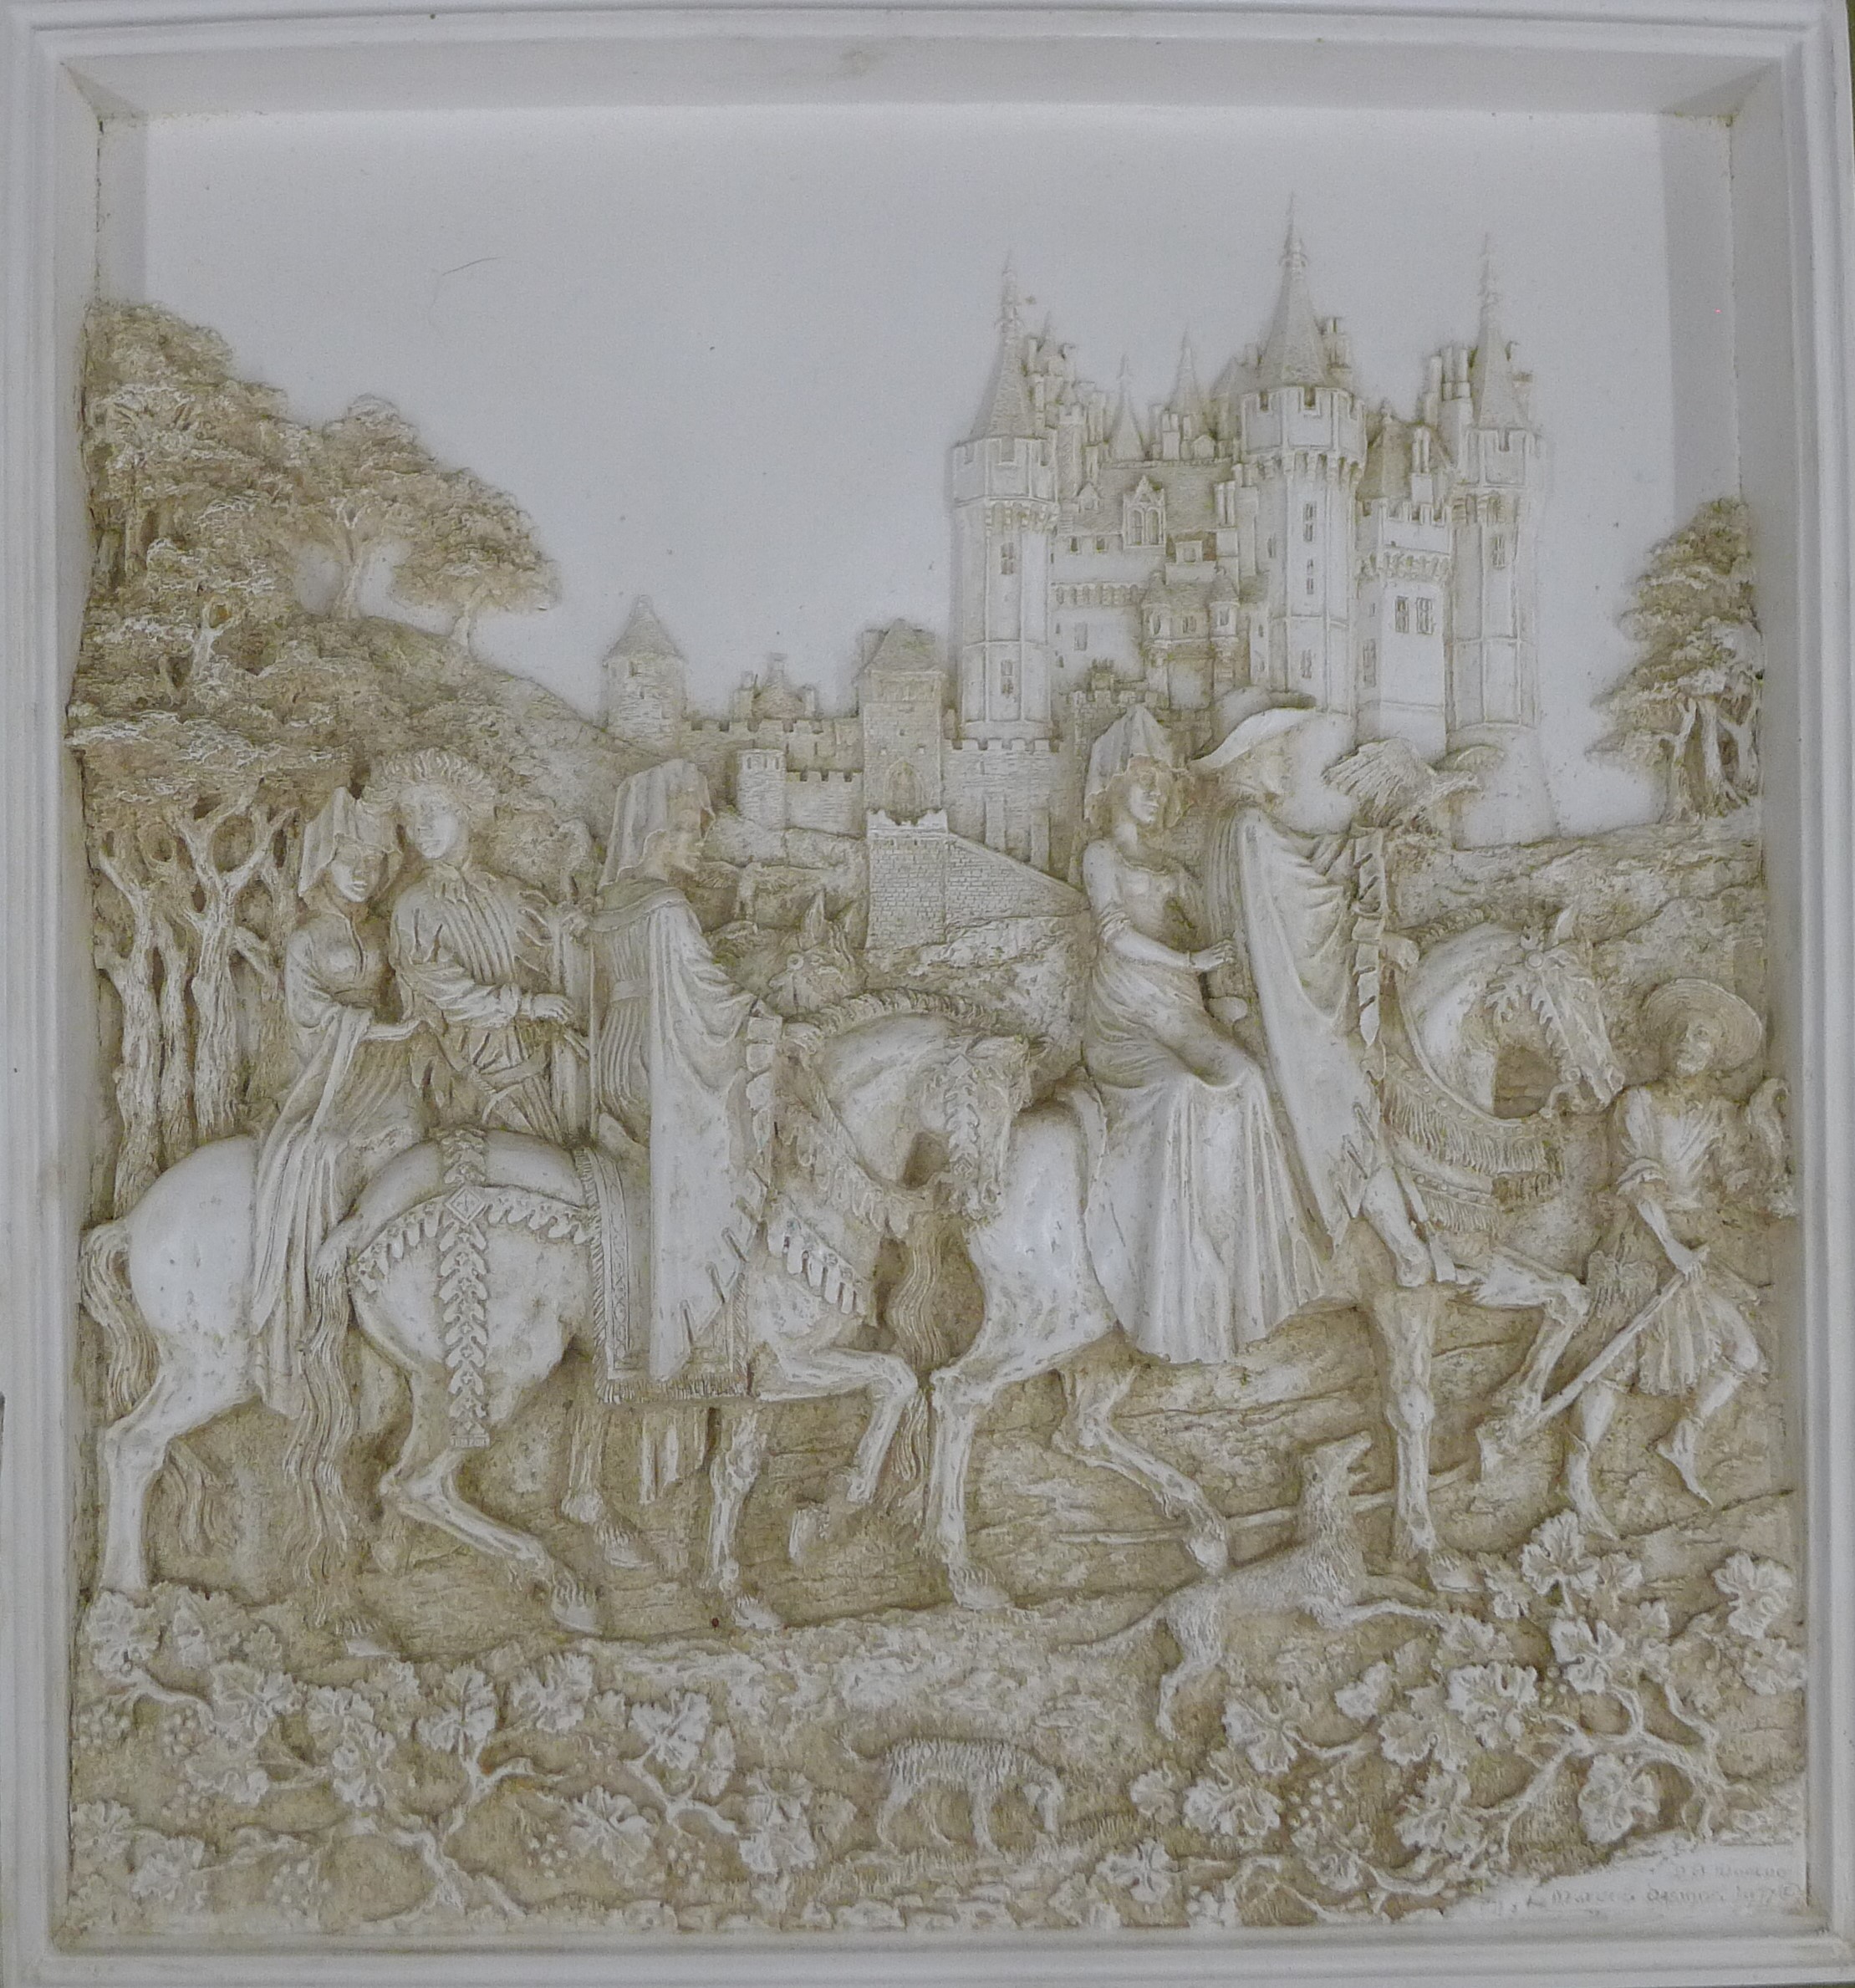 A composite picture depicting a medieval scene.